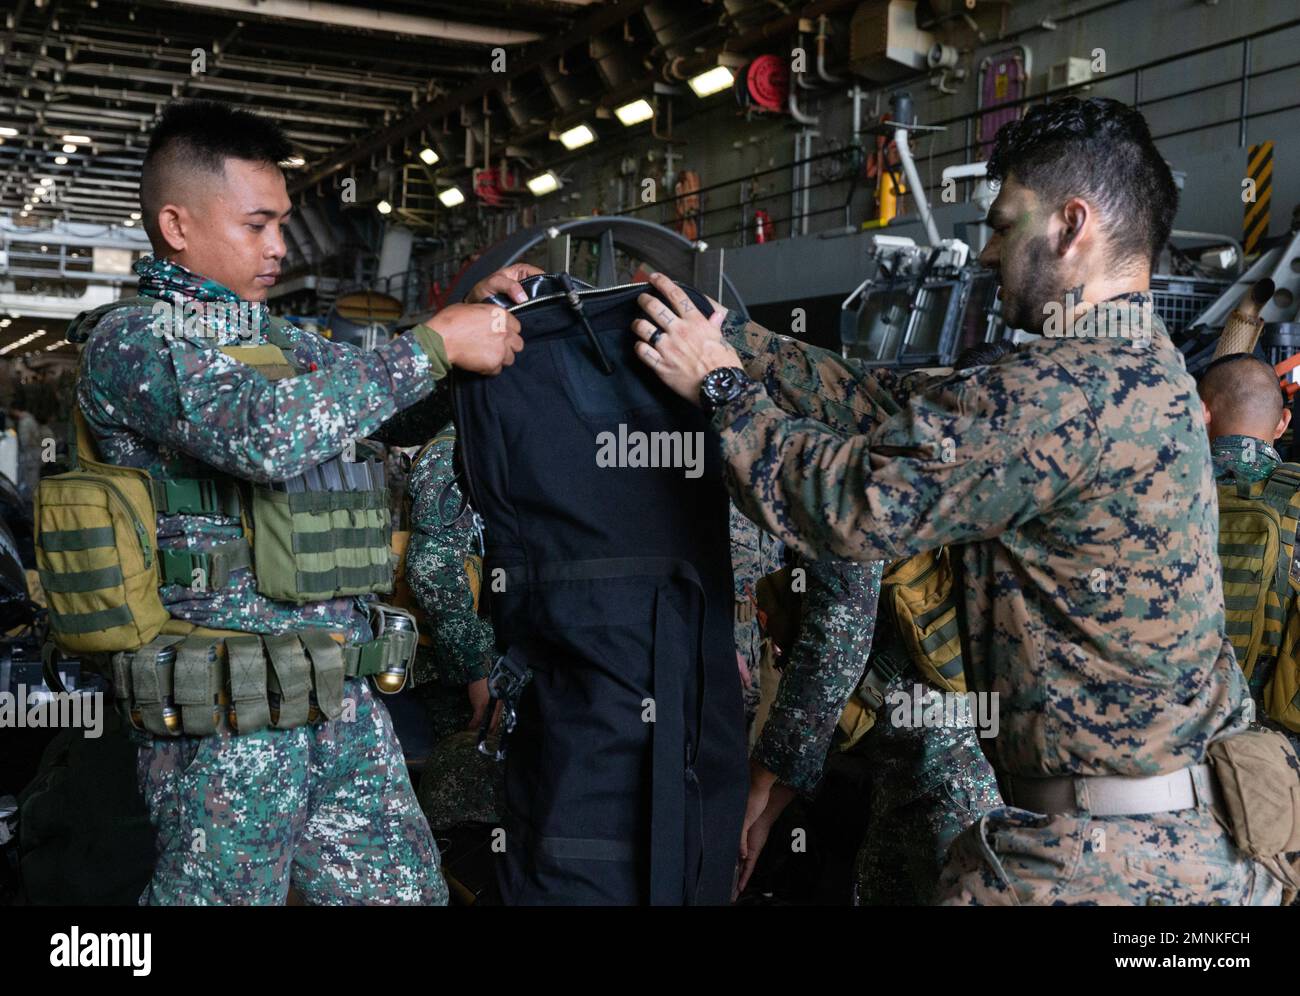 U.S. Navy Hospital Corpsman 3rd Class Jacob Fimbres, a Los Angeles, California, native, with Battalion Landing Team 2/5, 31st Marine Expeditionary Unit, and a Philippine Marine zip up a gun bag aboard the Amphibious Transport Dock USS New Orleans (LPD 18) for KAMANDAG 6, in the Philippine Sea, Oct. 3, 2022. The two forces participated in a bilateral amphibious assault focused on increasing interoperability and shared understanding of tactics. KAMANDAG is an annual, bilateral exercise between the Armed Forces of the Philippines and U.S. military designed to strengthen interoperability, capabili Stock Photo